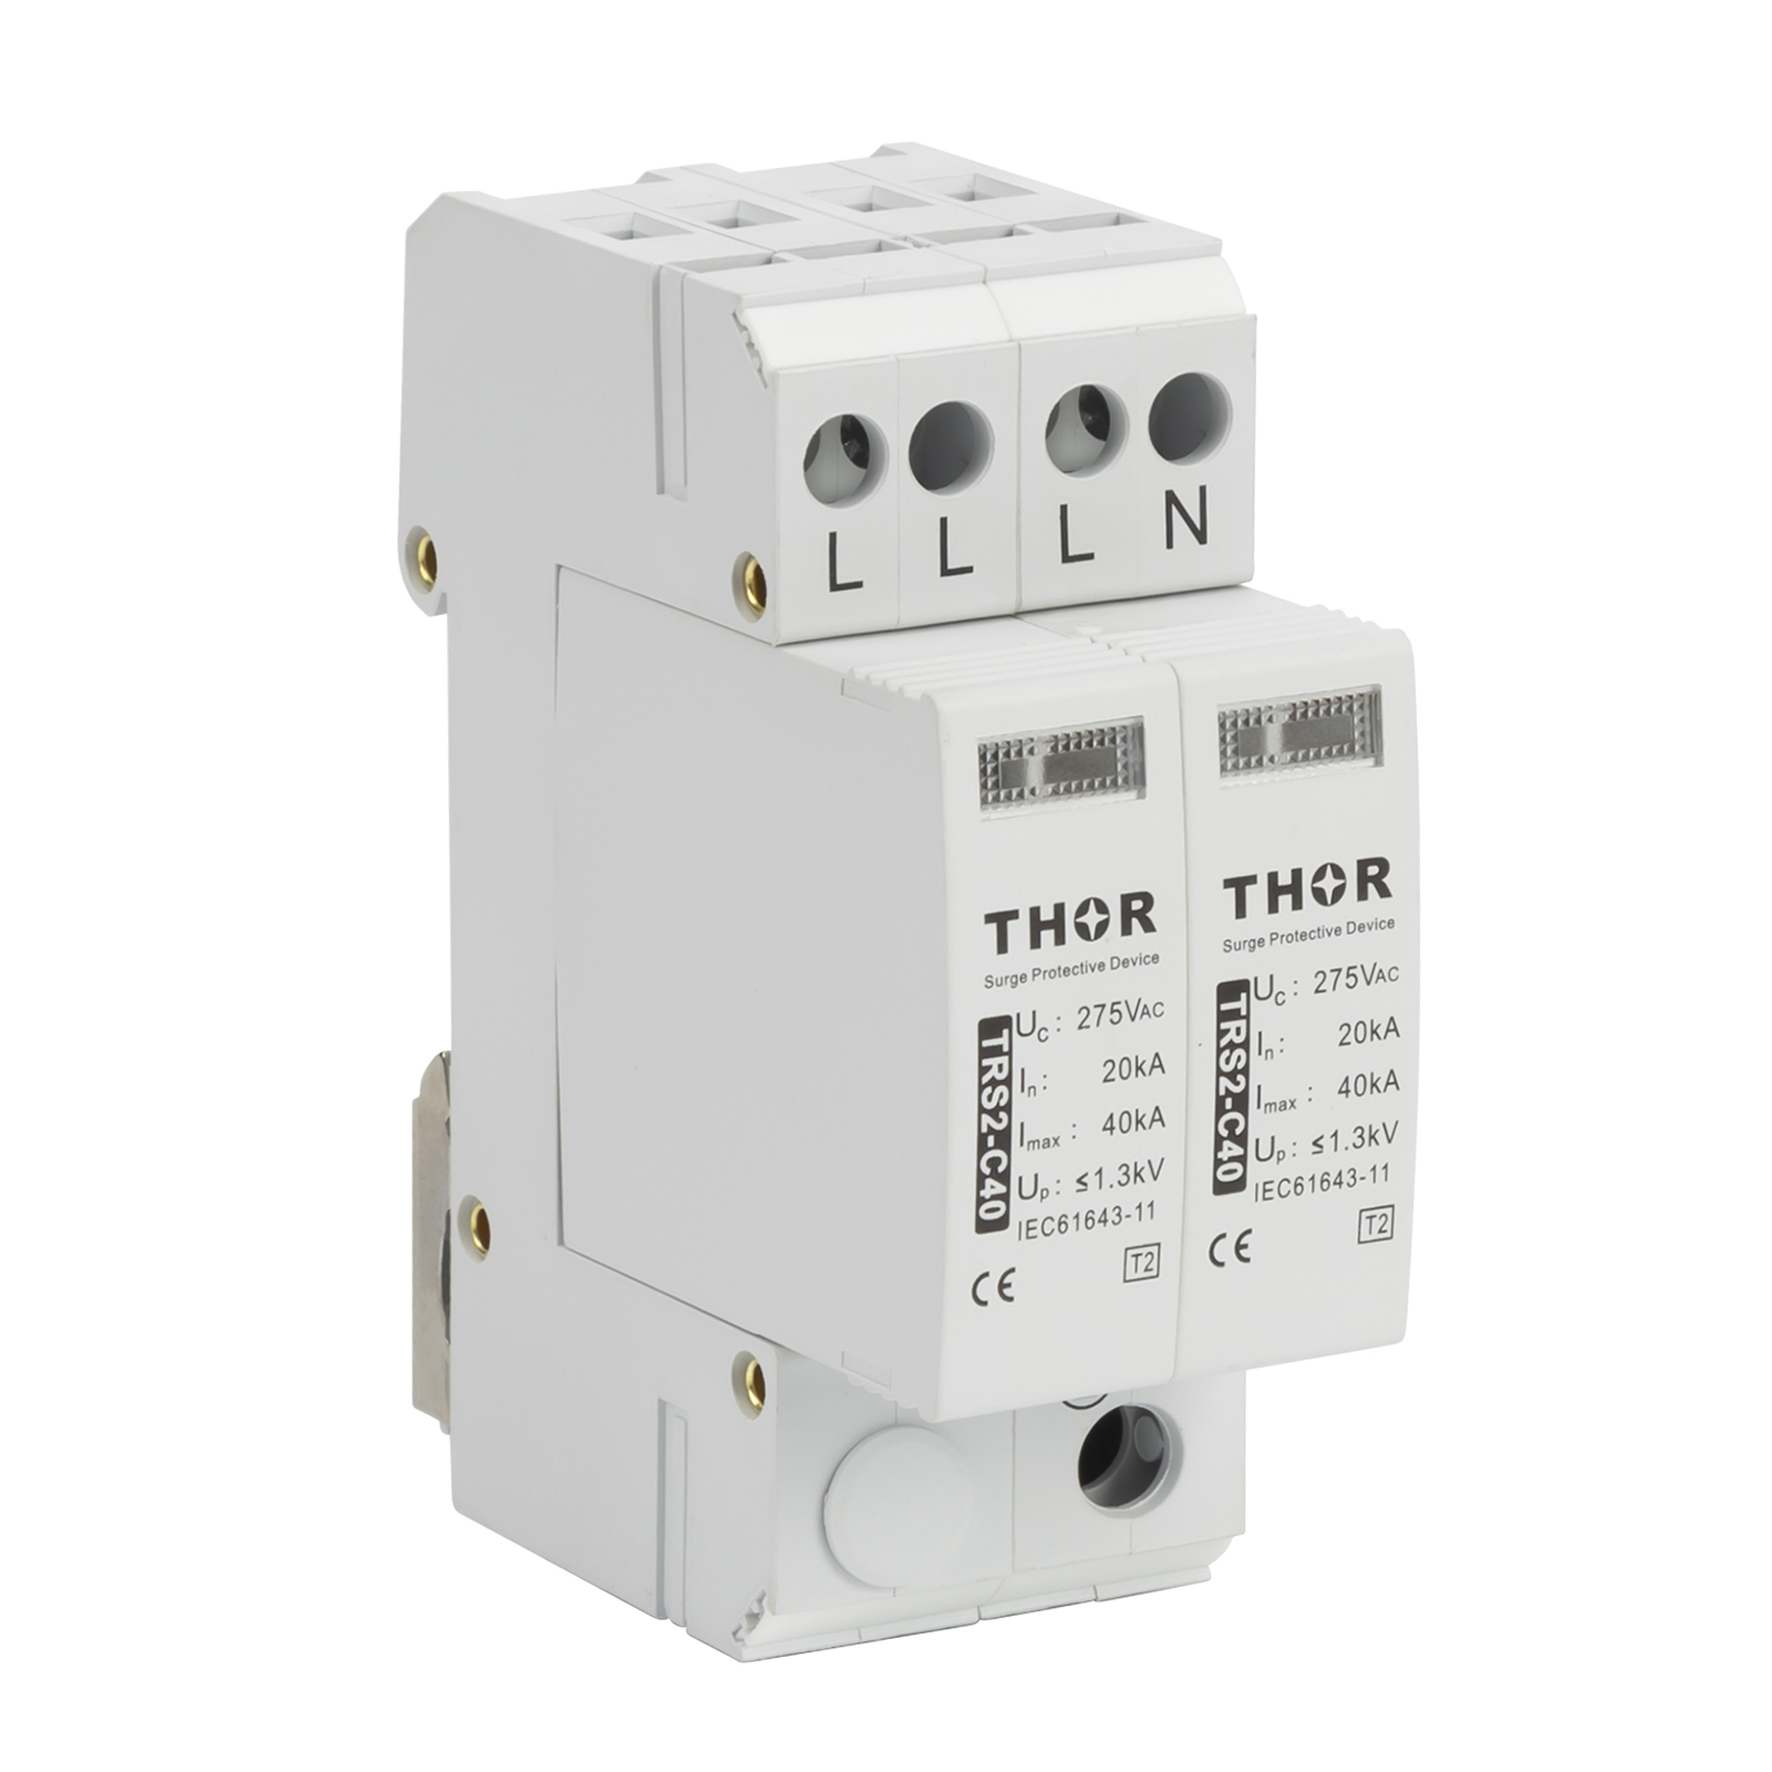 Type 2 AC surge protection device TRS2 series